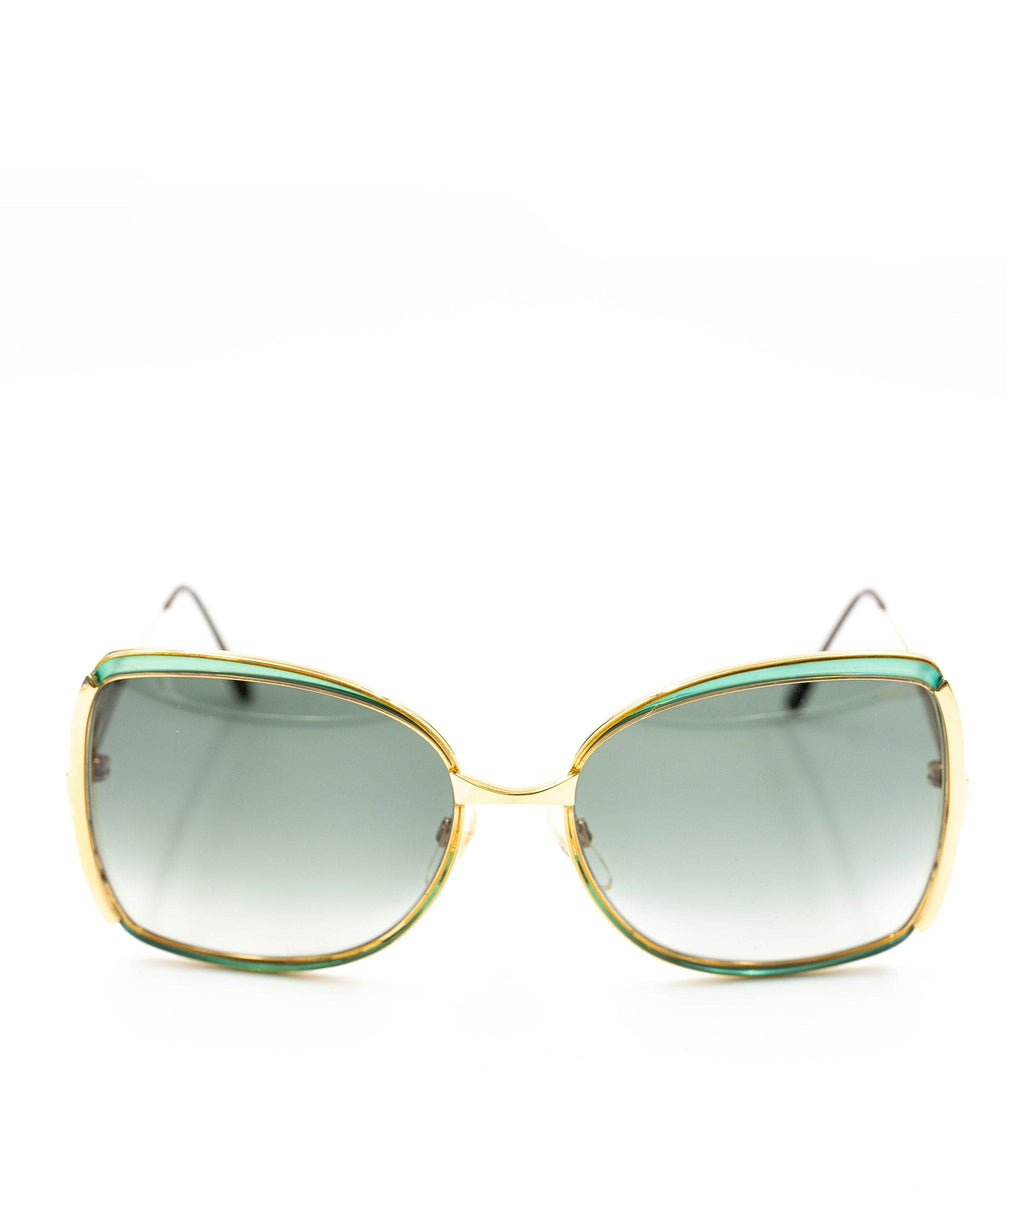 Gucci 70s inspired Sunglasses - AWL2603 – LuxuryPromise